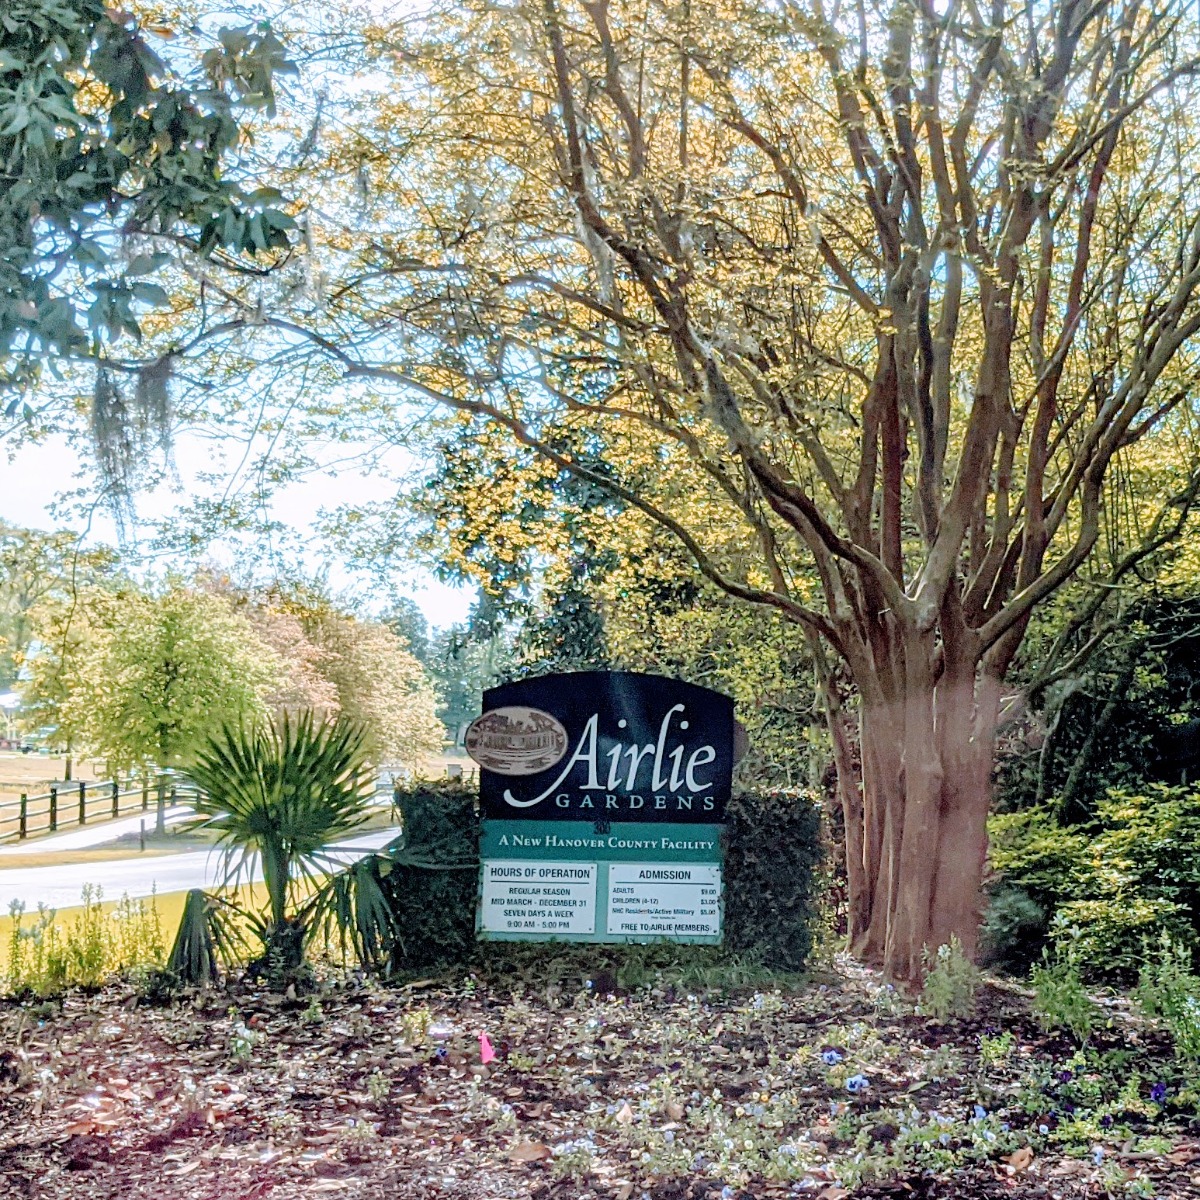 Visiting Airlie Gardens in Wilmington, NC